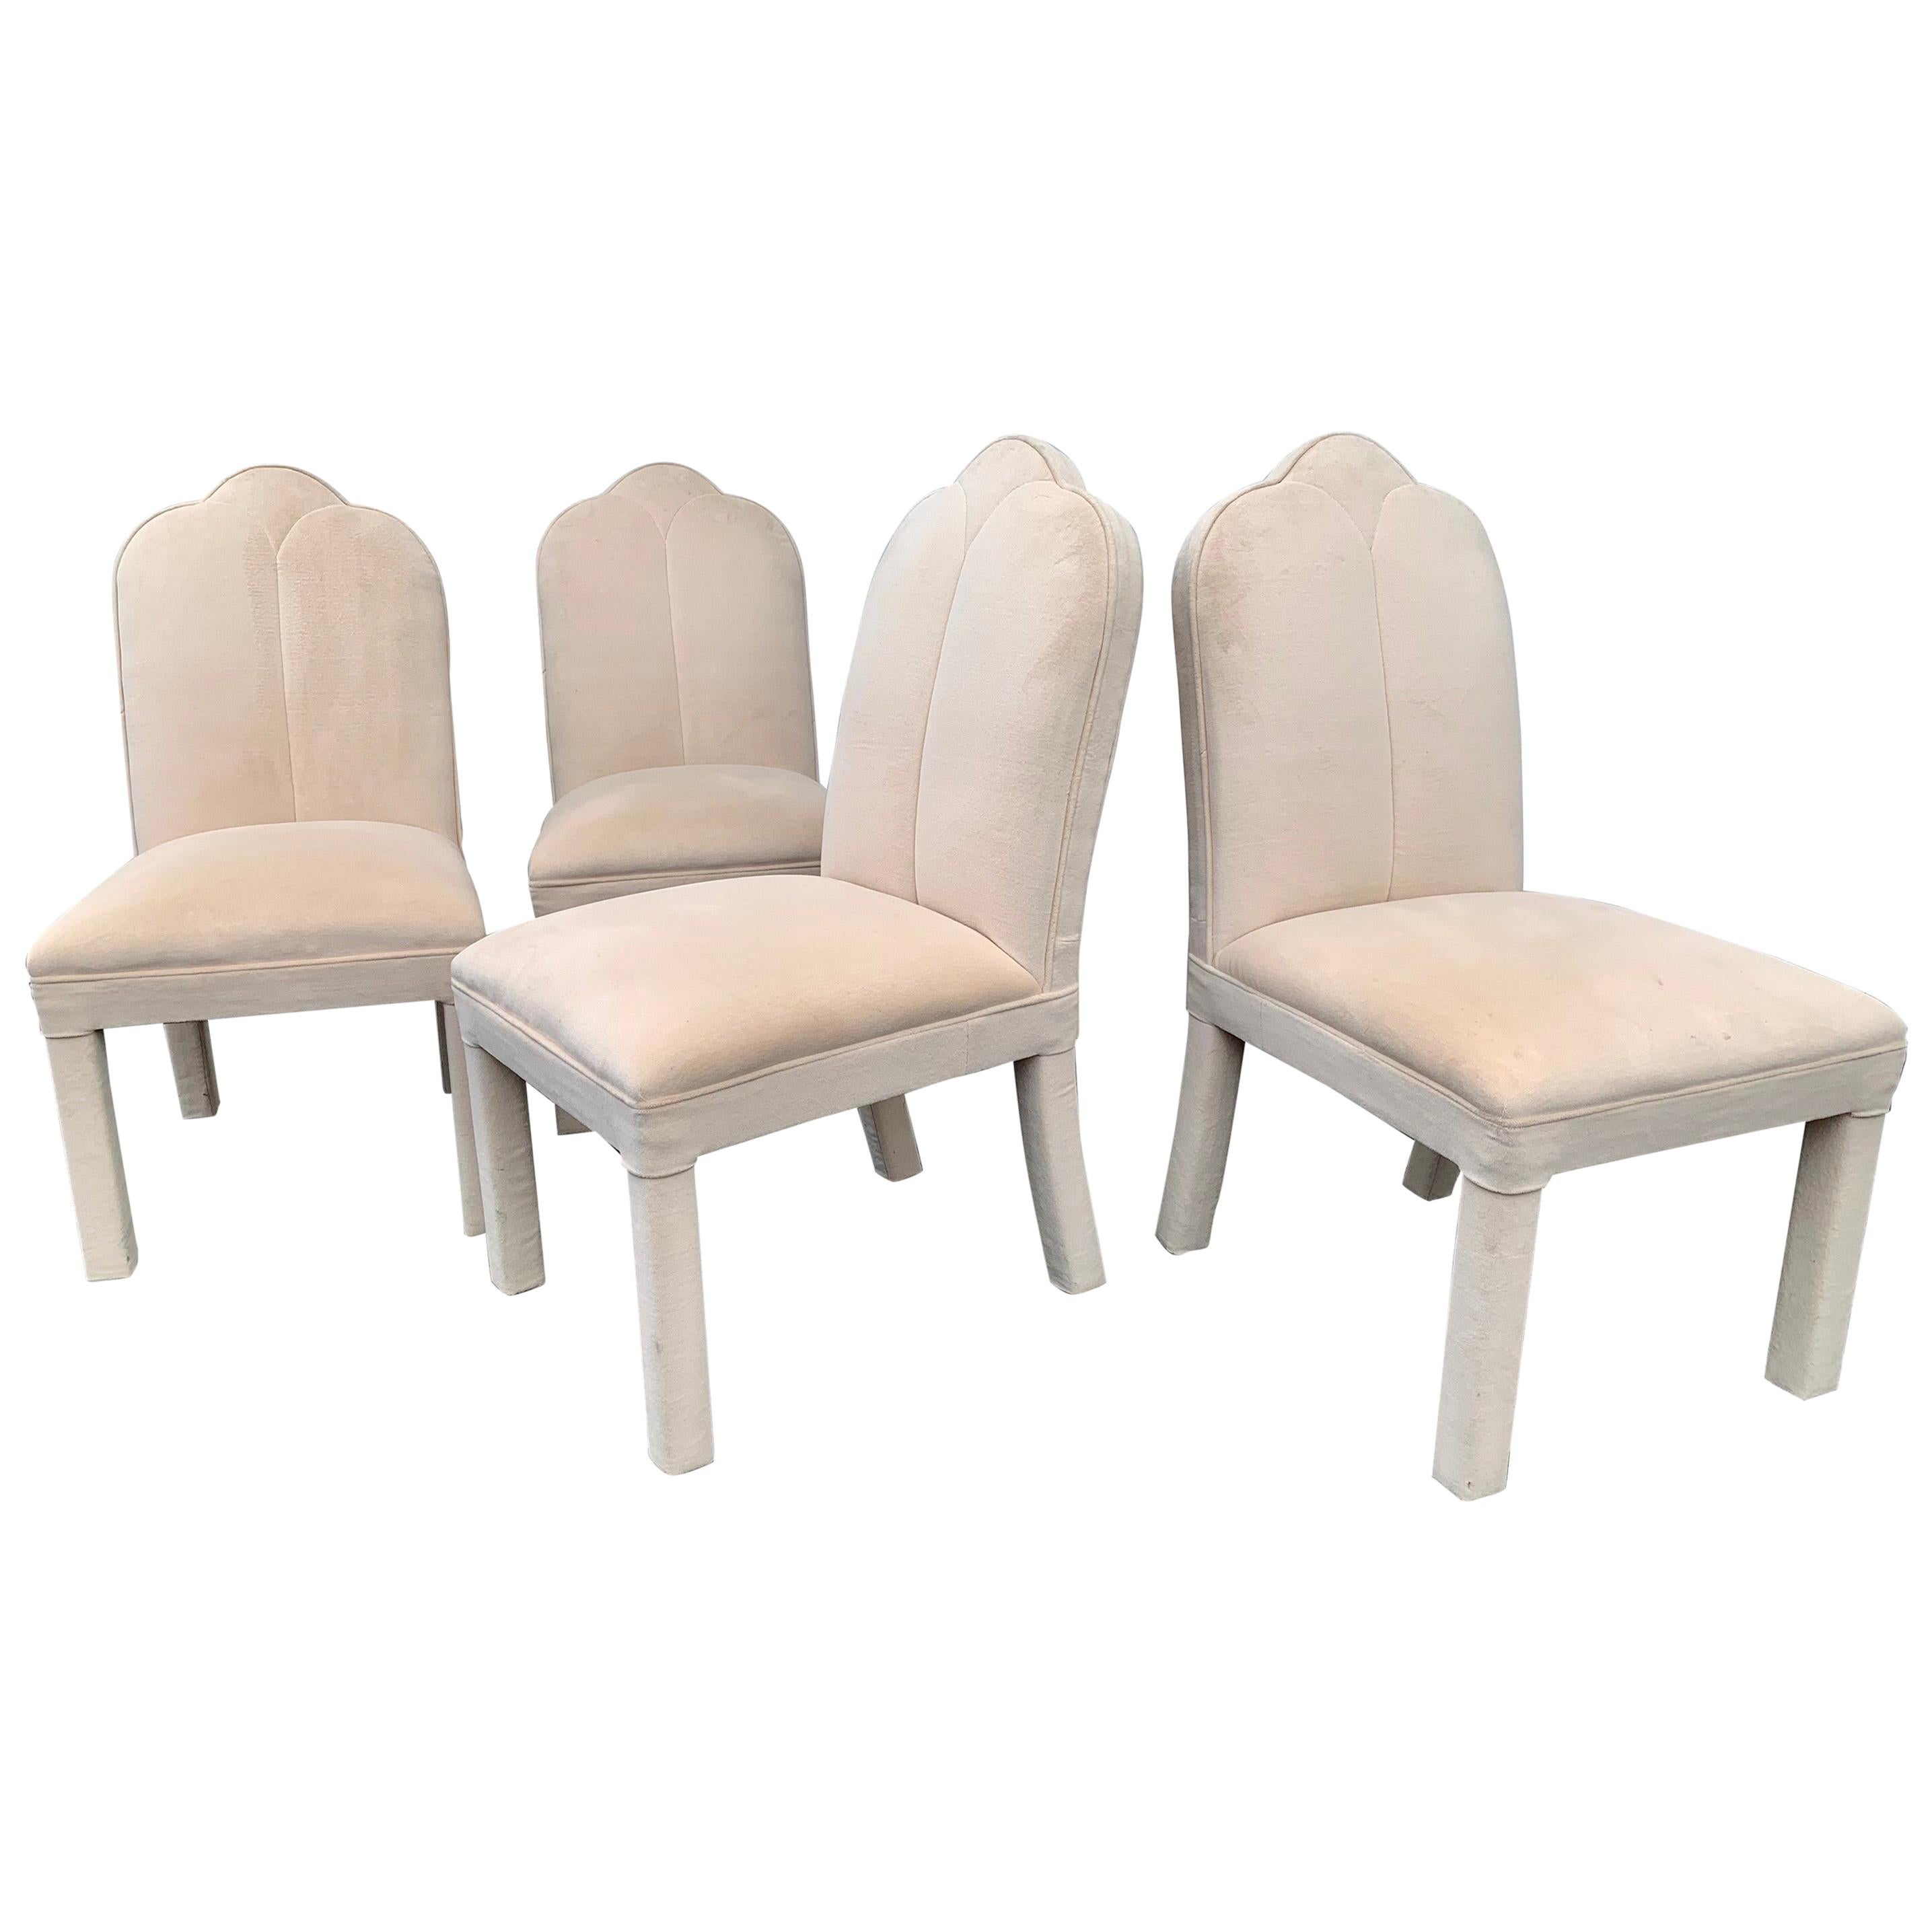 1980s Art Deco Revival Upholstered Parsons Dining Chairs, Milo Baughman Style